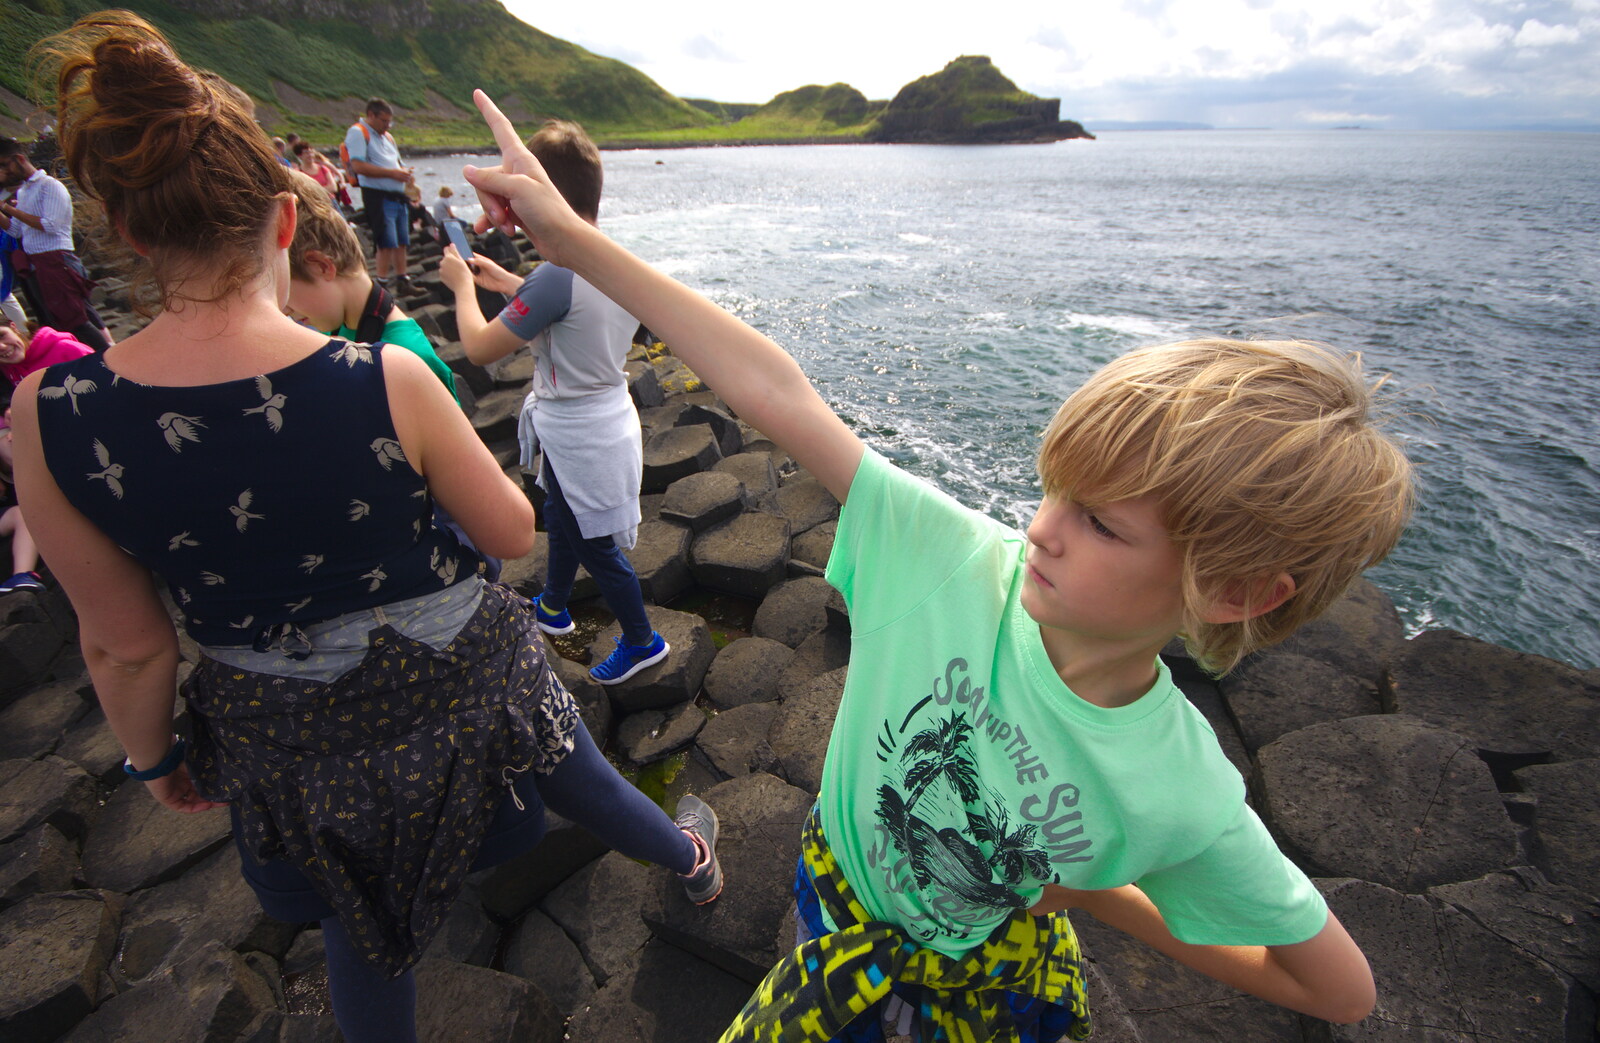 Harry points the way from The Giant's Causeway, Bushmills, County Antrim, Northern Ireland - 14th August 2019